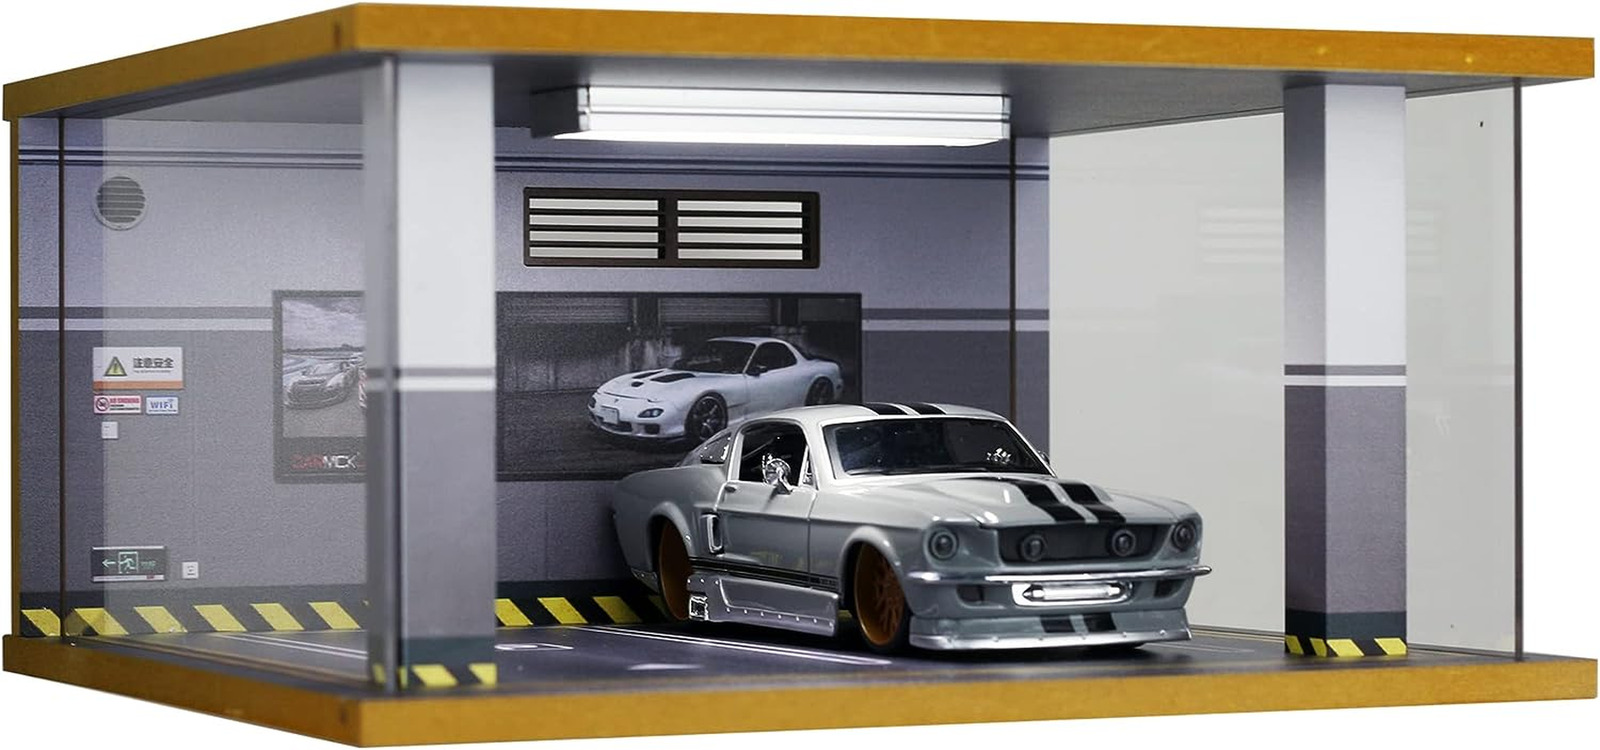 1/24 Scale Die-Cast Car Display Case with LED Lights Acrylic Cover - Wood Finish